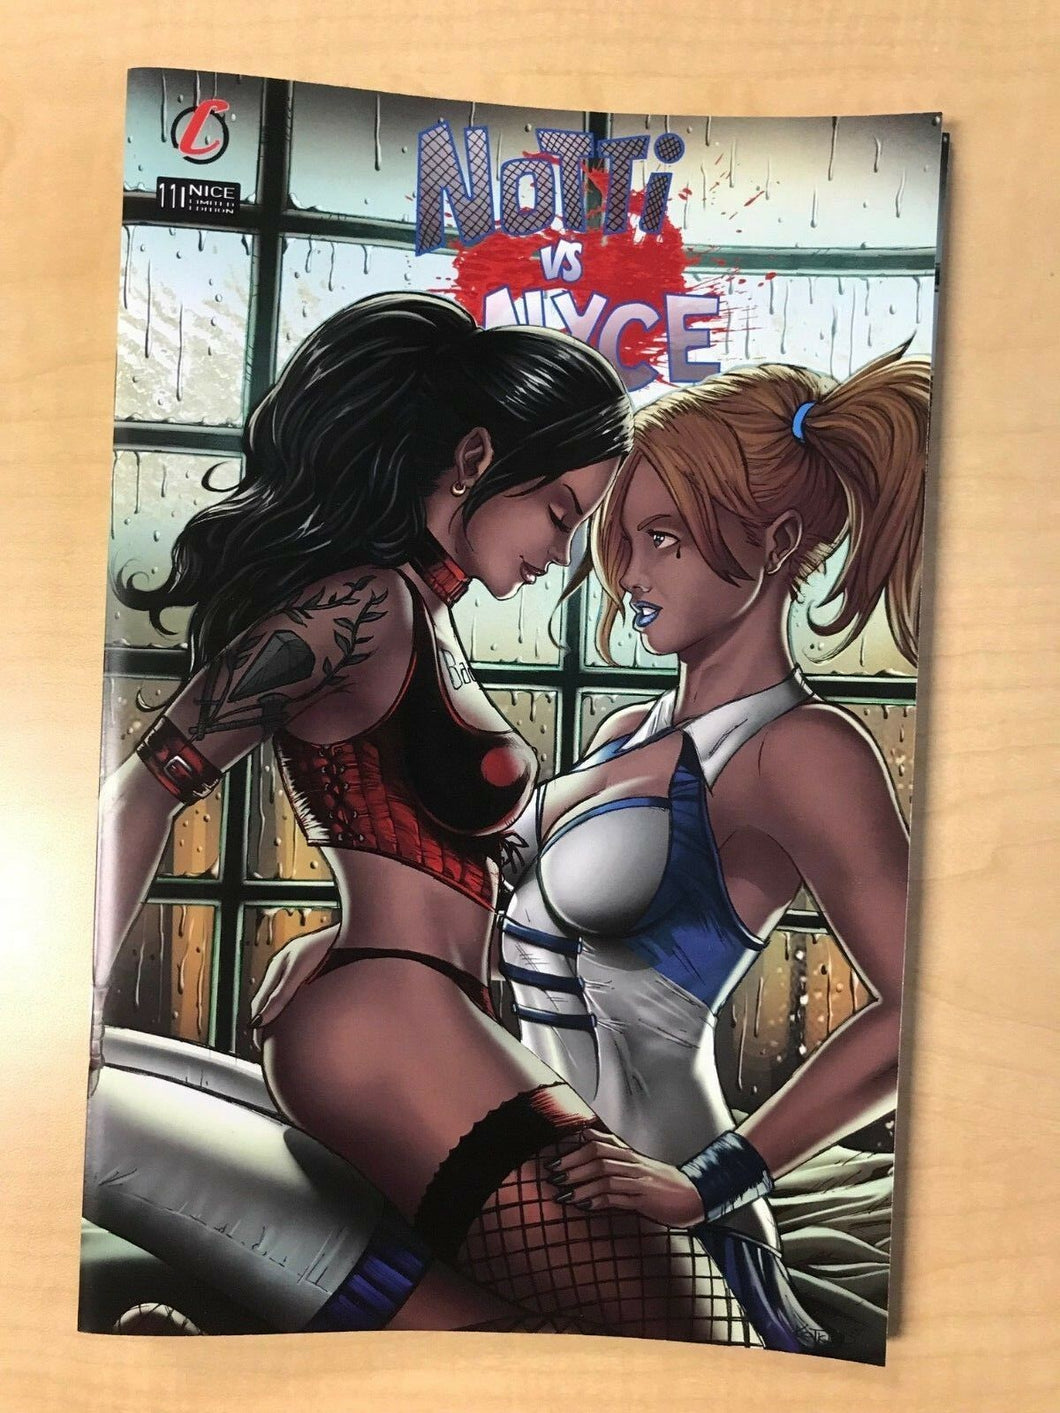 Notti & Nyce #11 Anastasia's Collectibles Alex Kotkin NICE Variant Cover